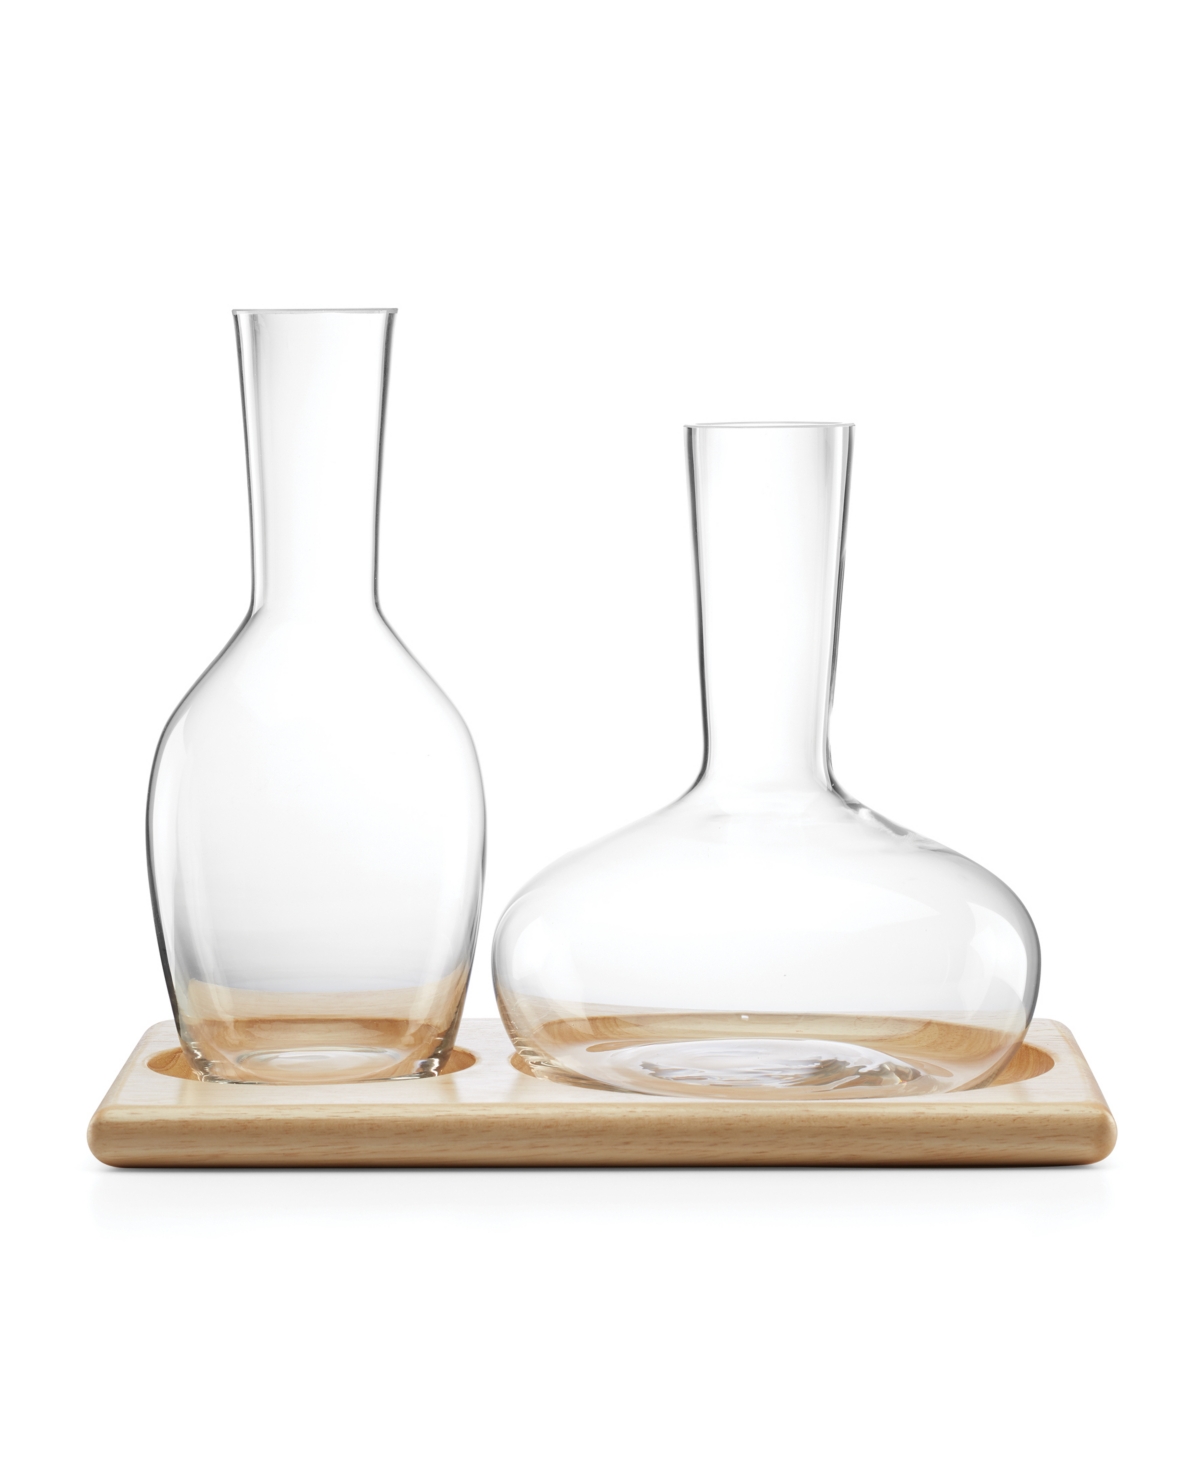 Lenox Tuscany Classics Carafe Set, 3 Piece In Clear